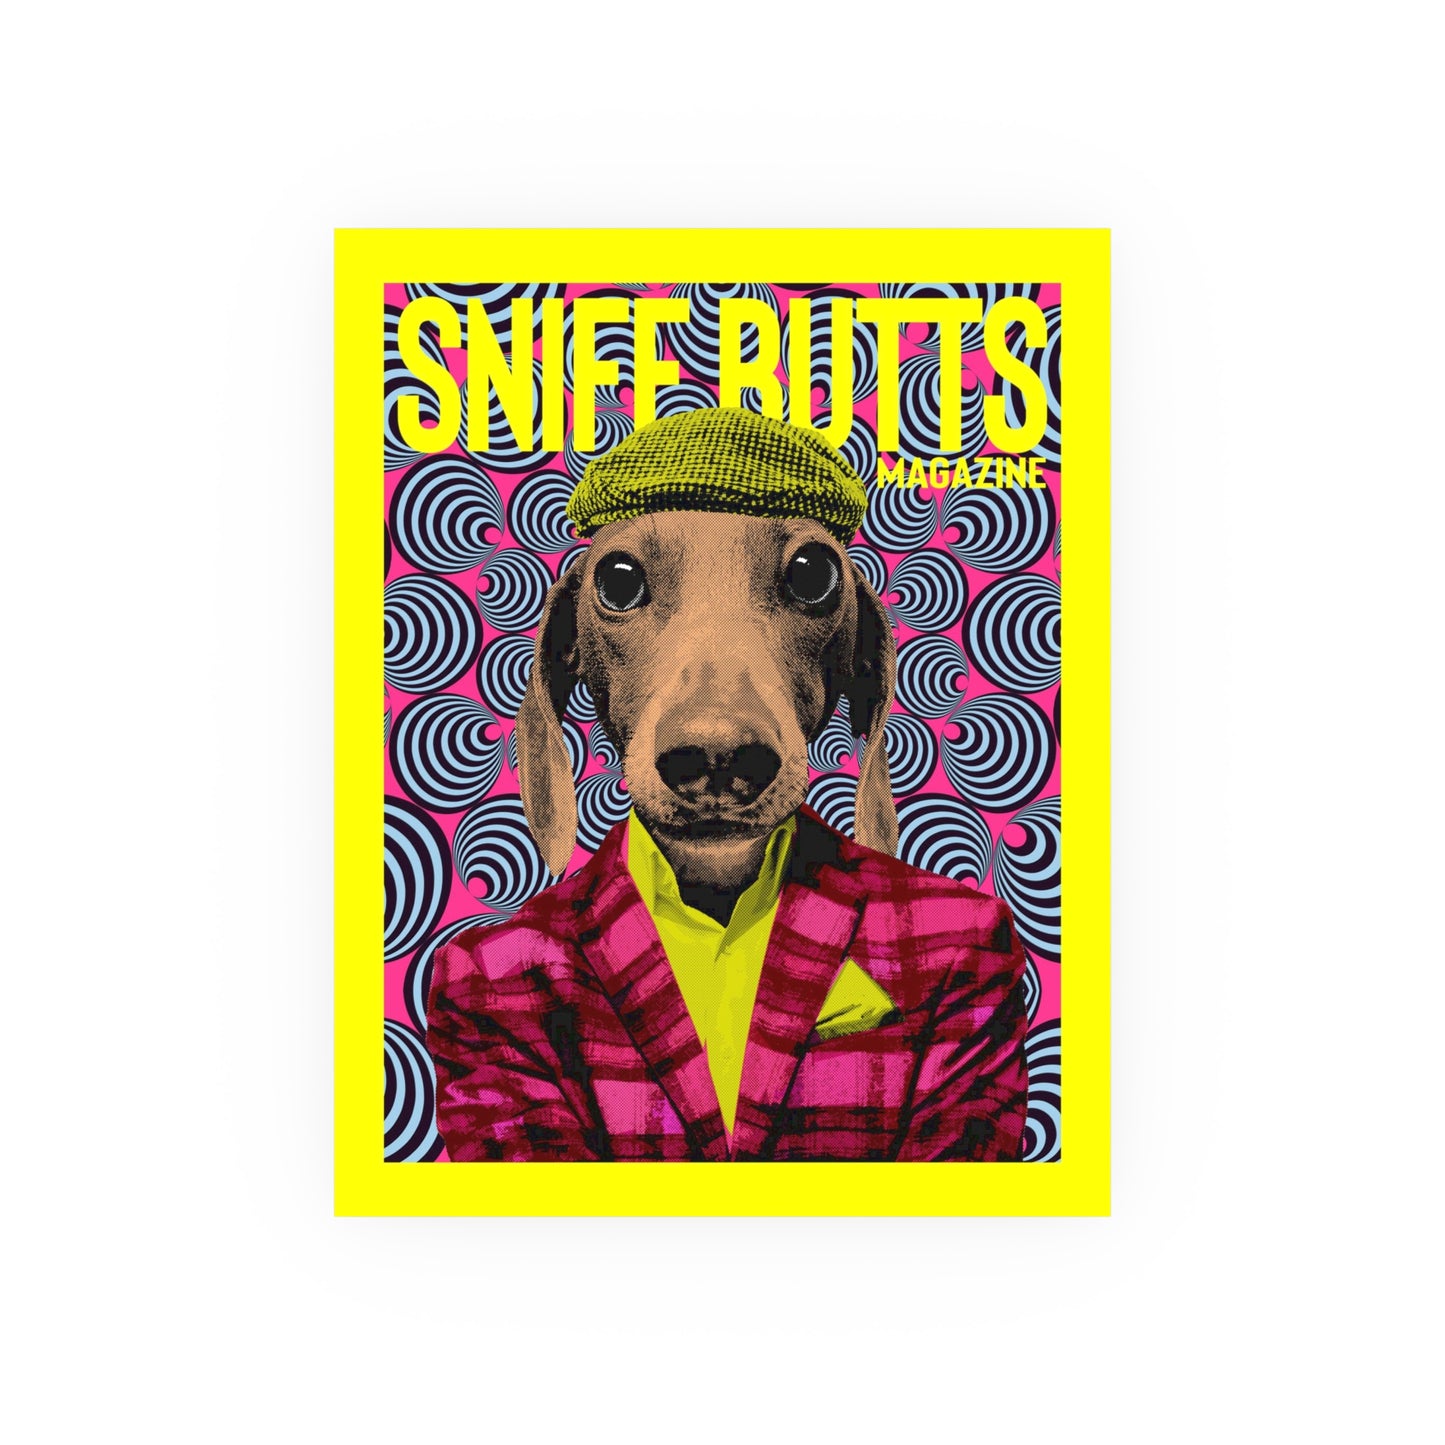 Sniff Butts, Satin/Matte Archival Poster